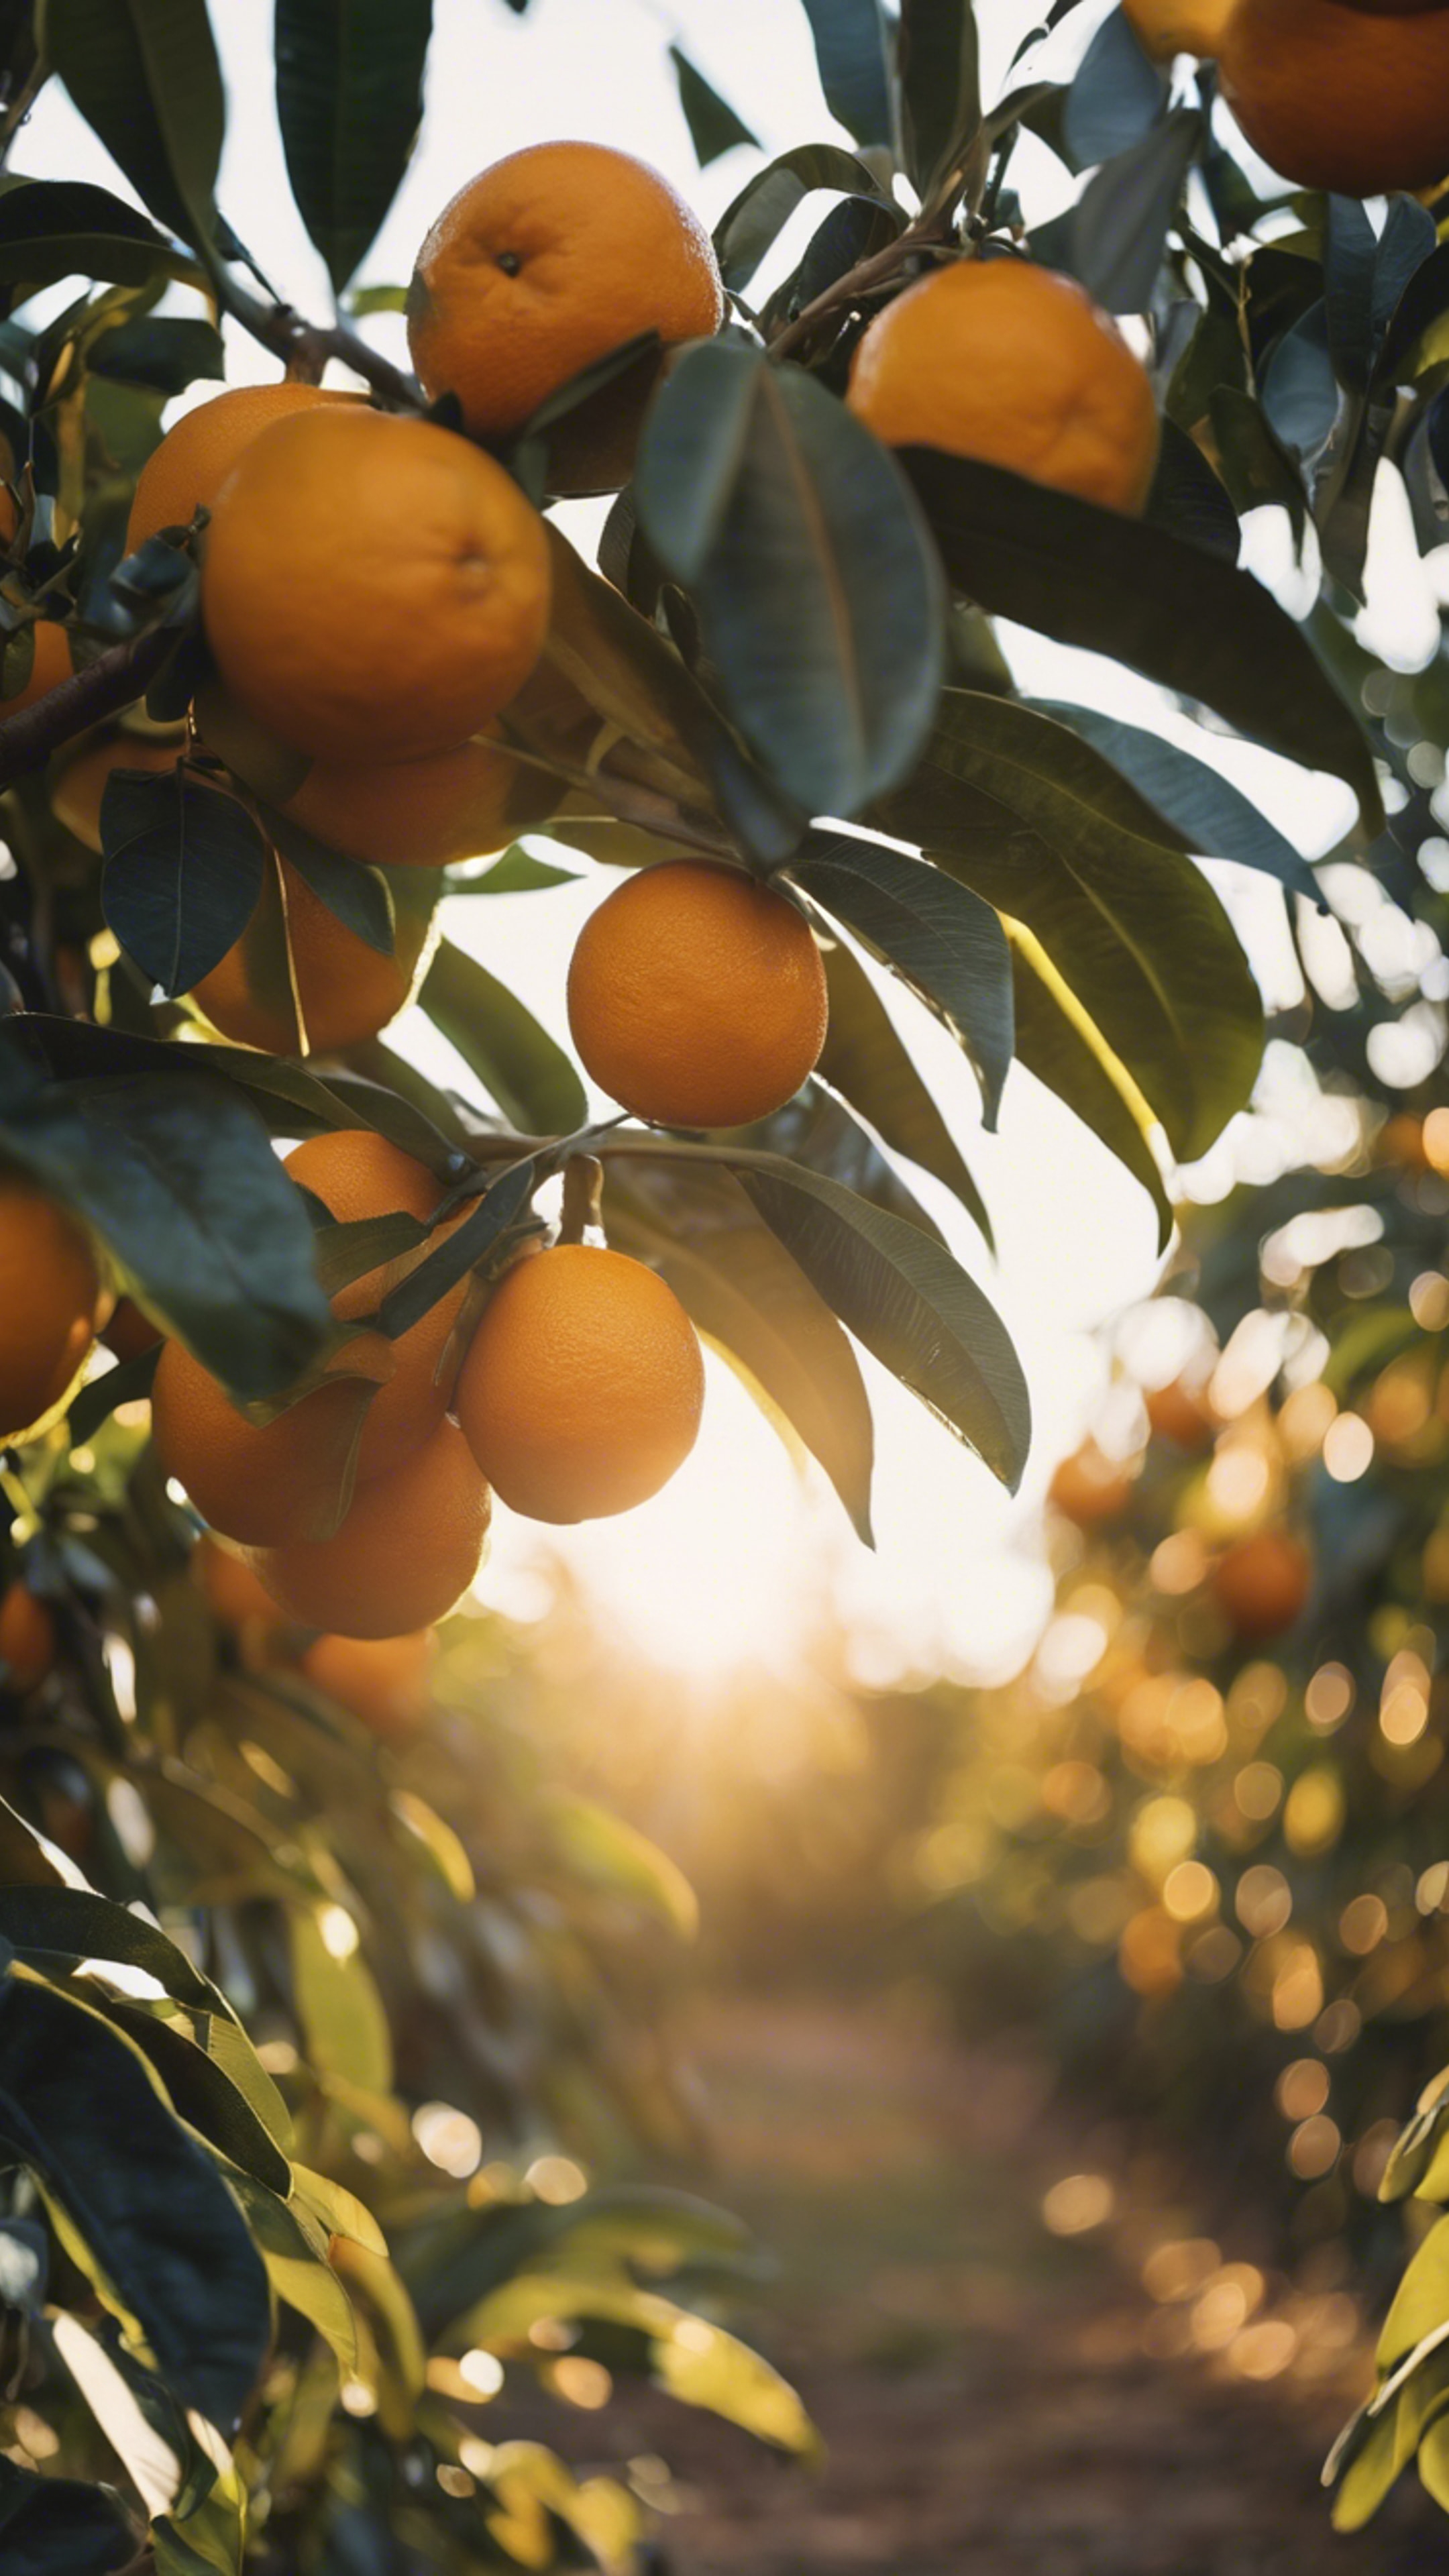 An orange grove in central Florida, with the sun casting a golden hue over ripe oranges ready for harvest. 墙纸[4bbebc31cb8441e2b681]